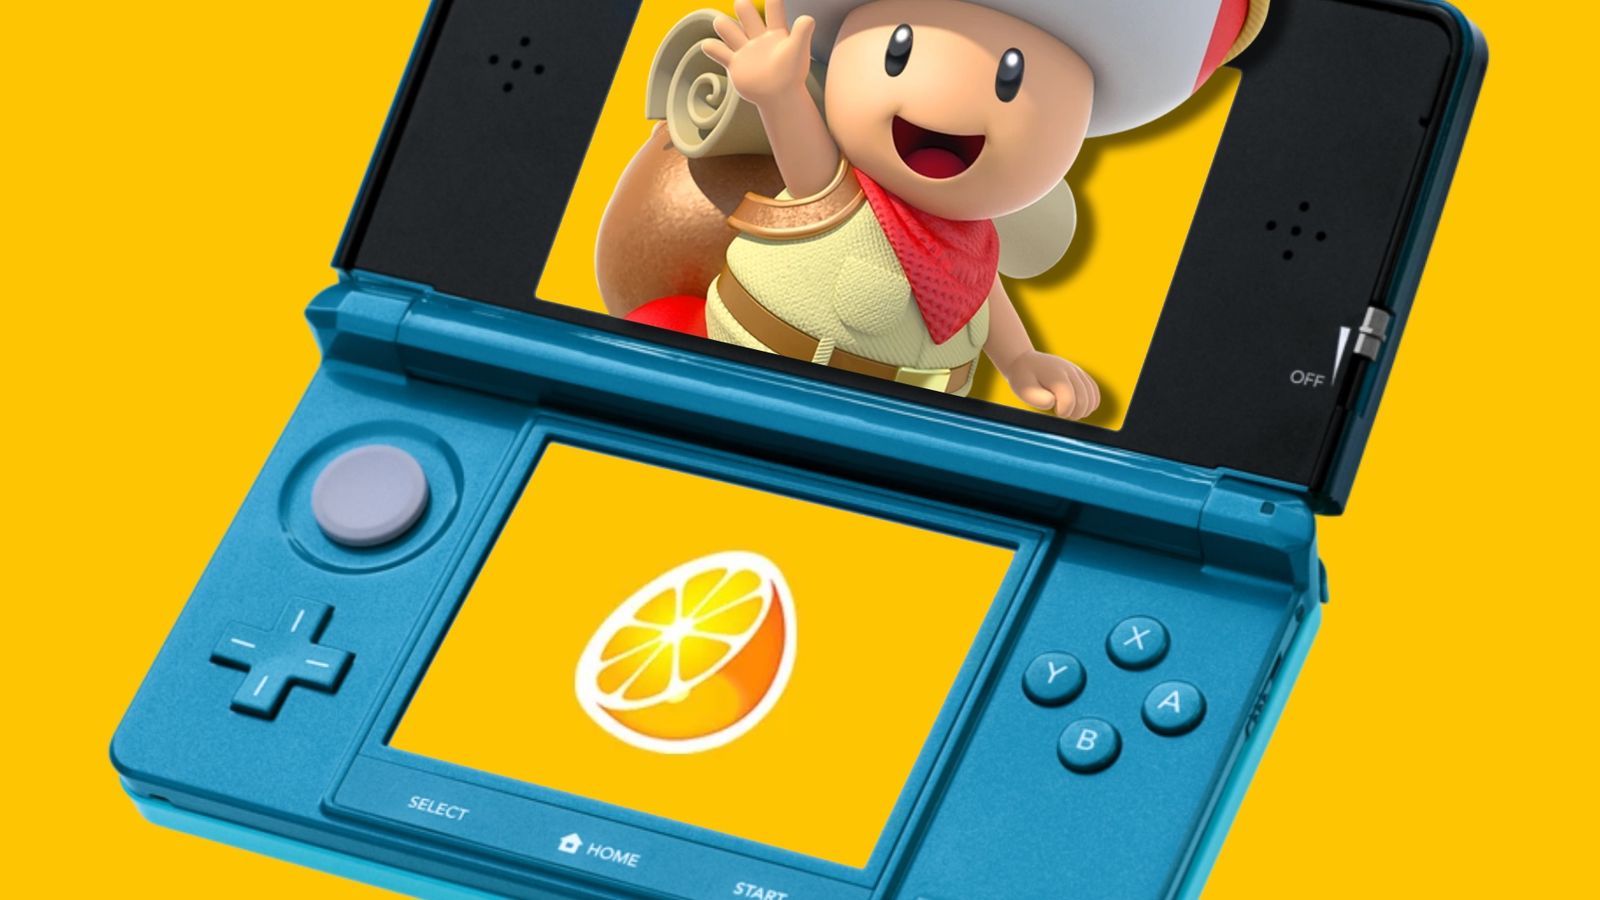 Captain Toad jumping out of a Nintendo 3DS console 